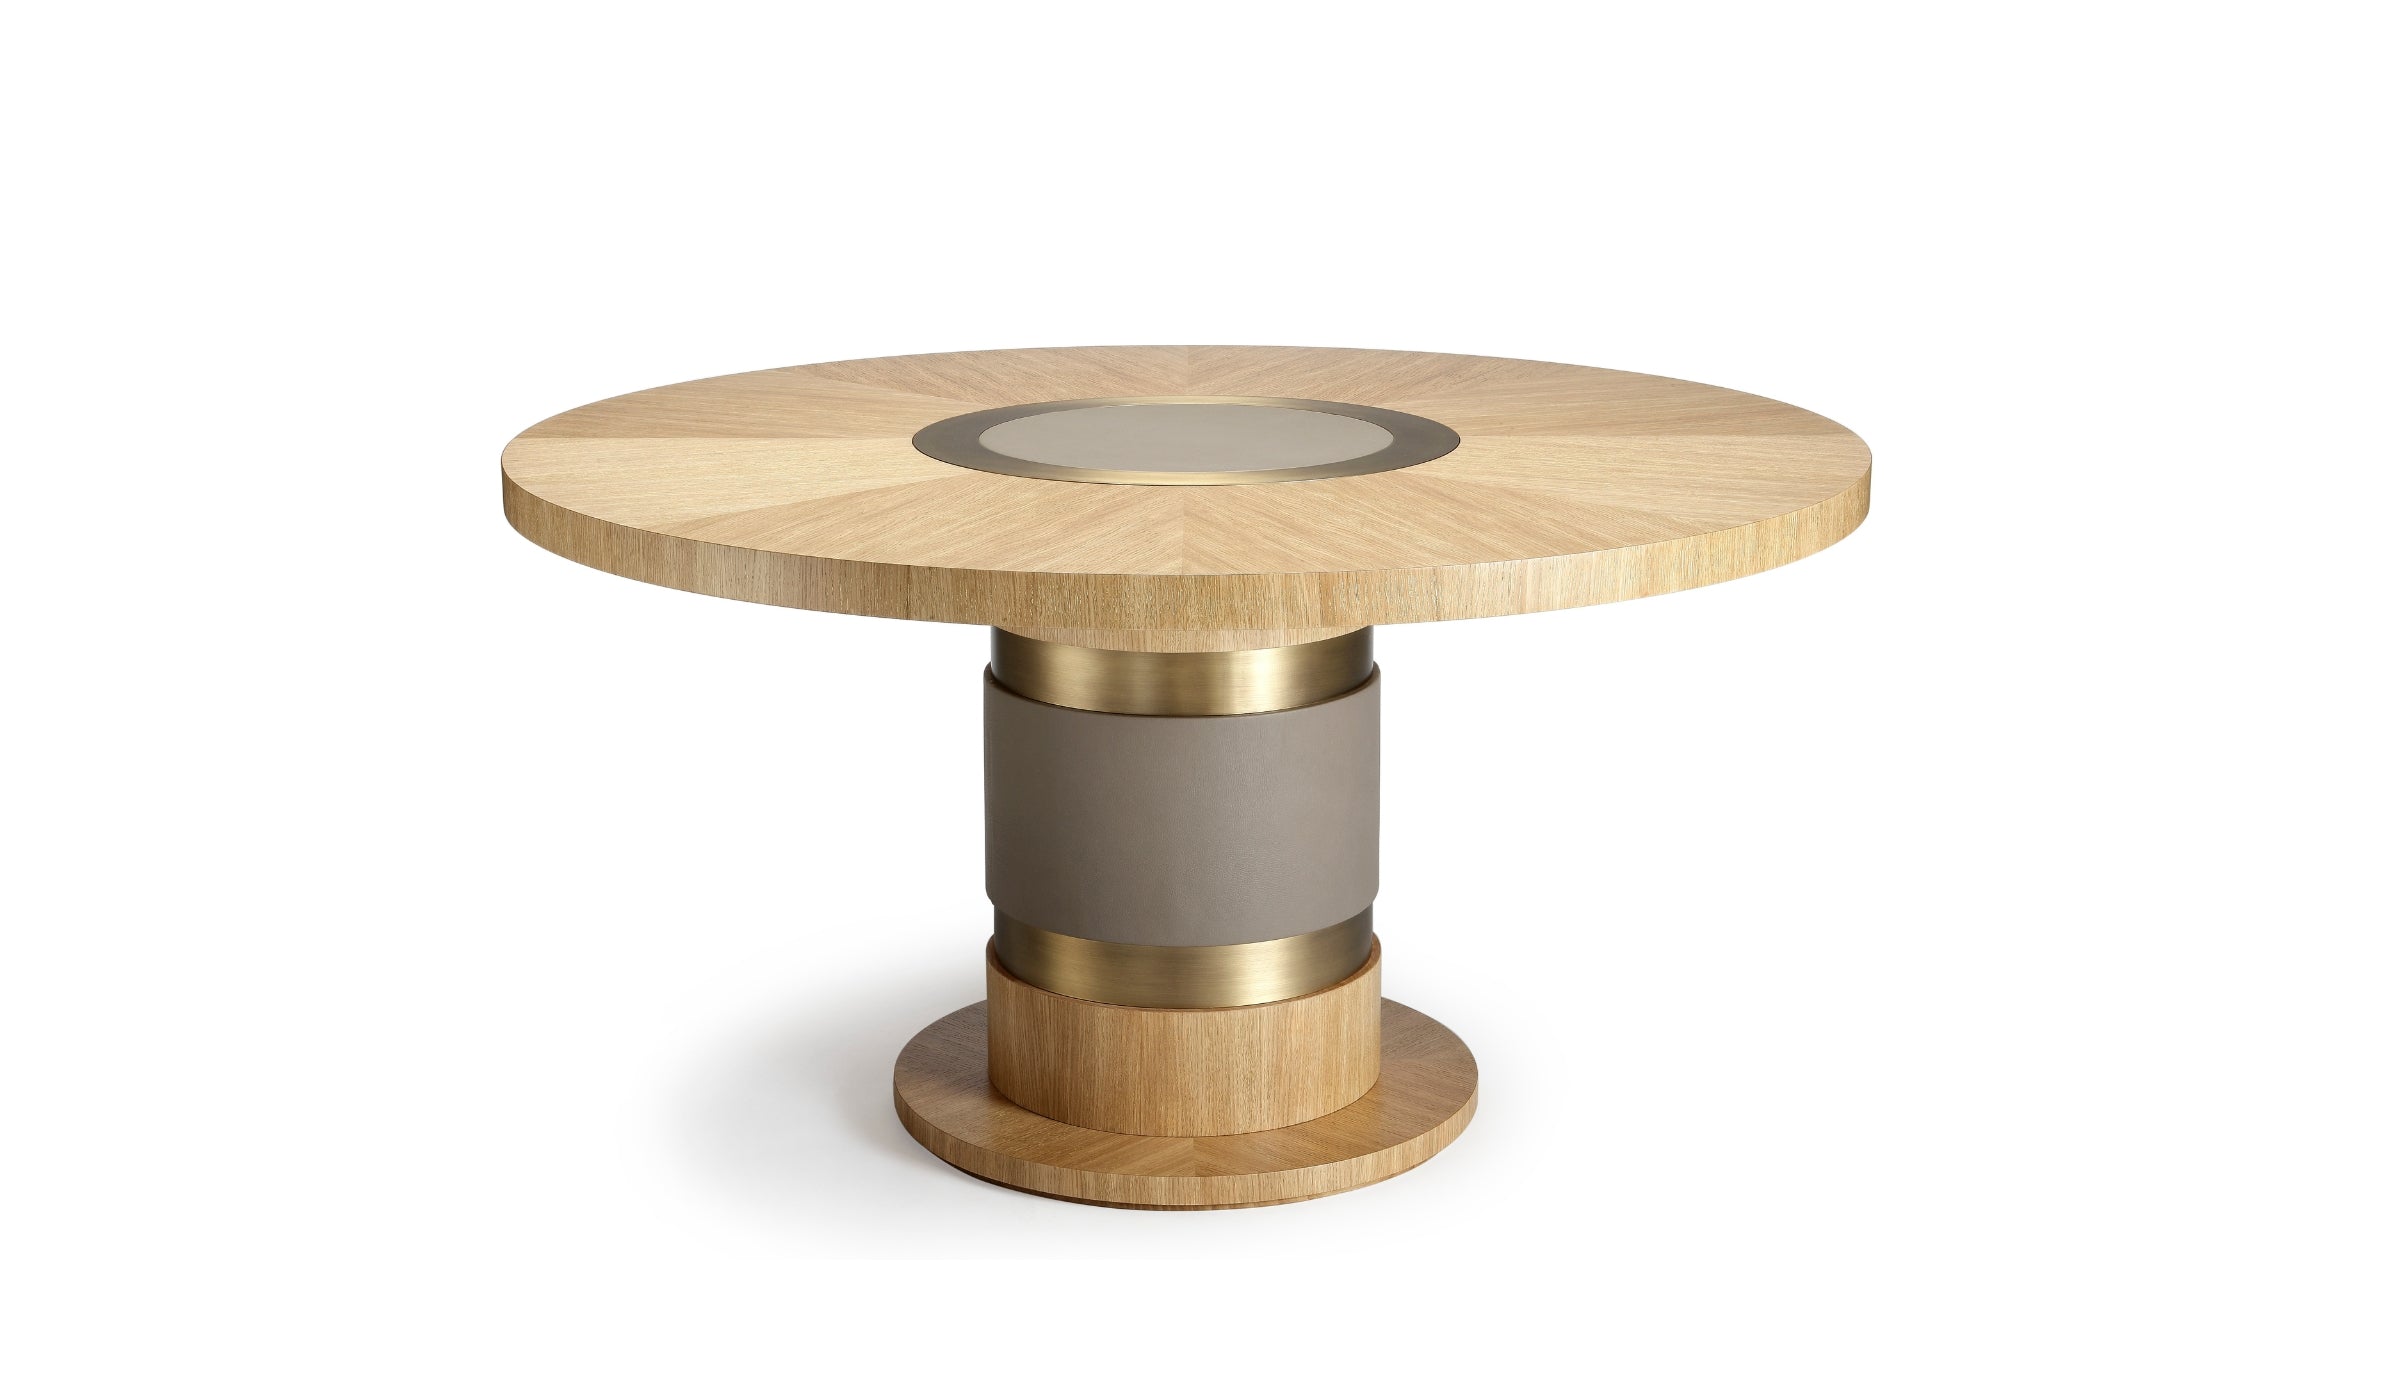 Lune - Dining table in limed oak, bronze and leather details